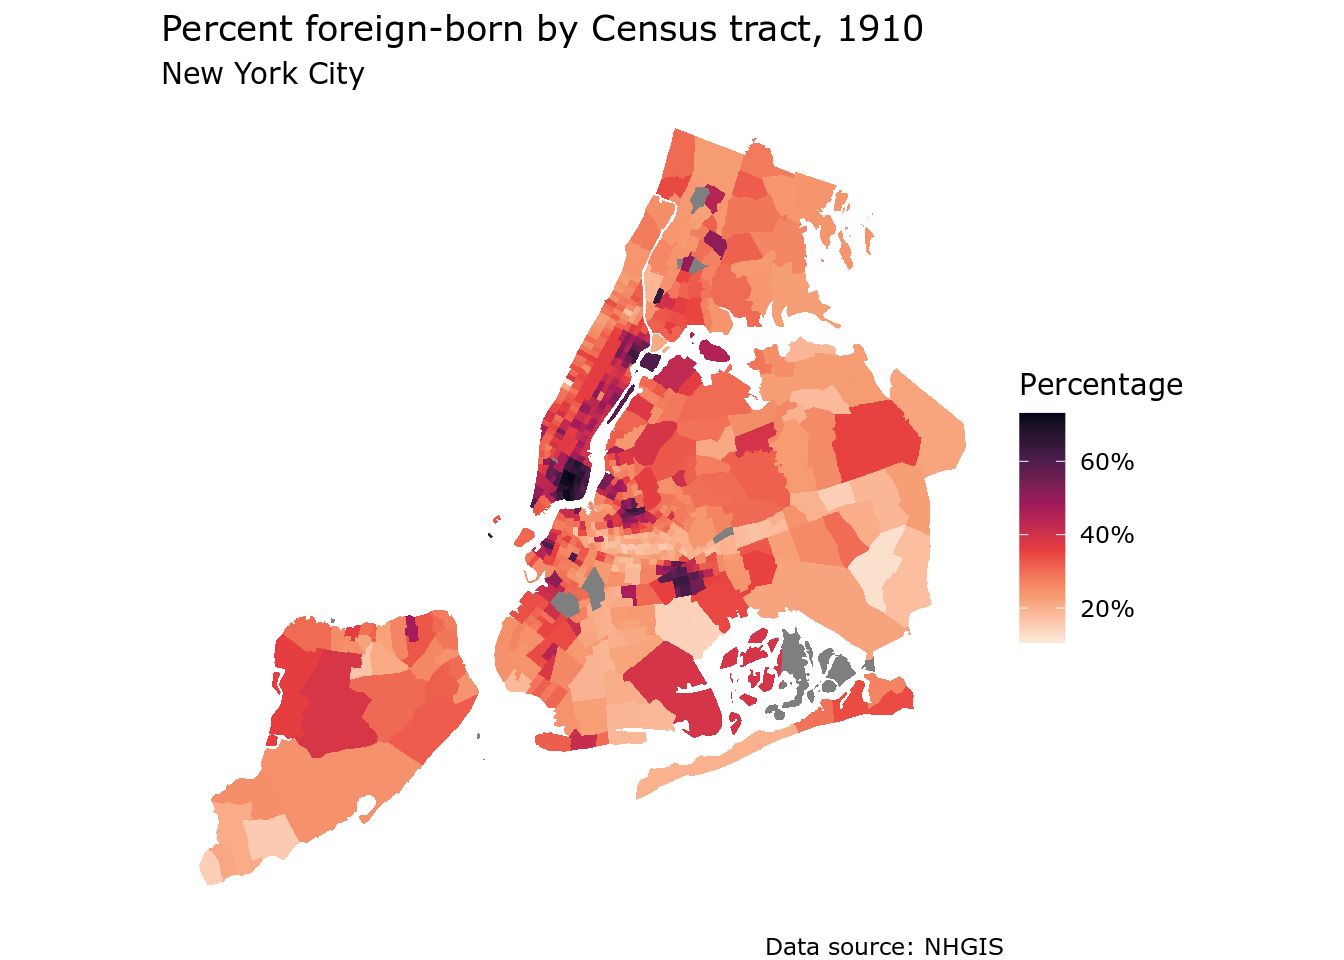 Percent foreign-born by Census tract in NYC in 1910, mapped with ggplot2